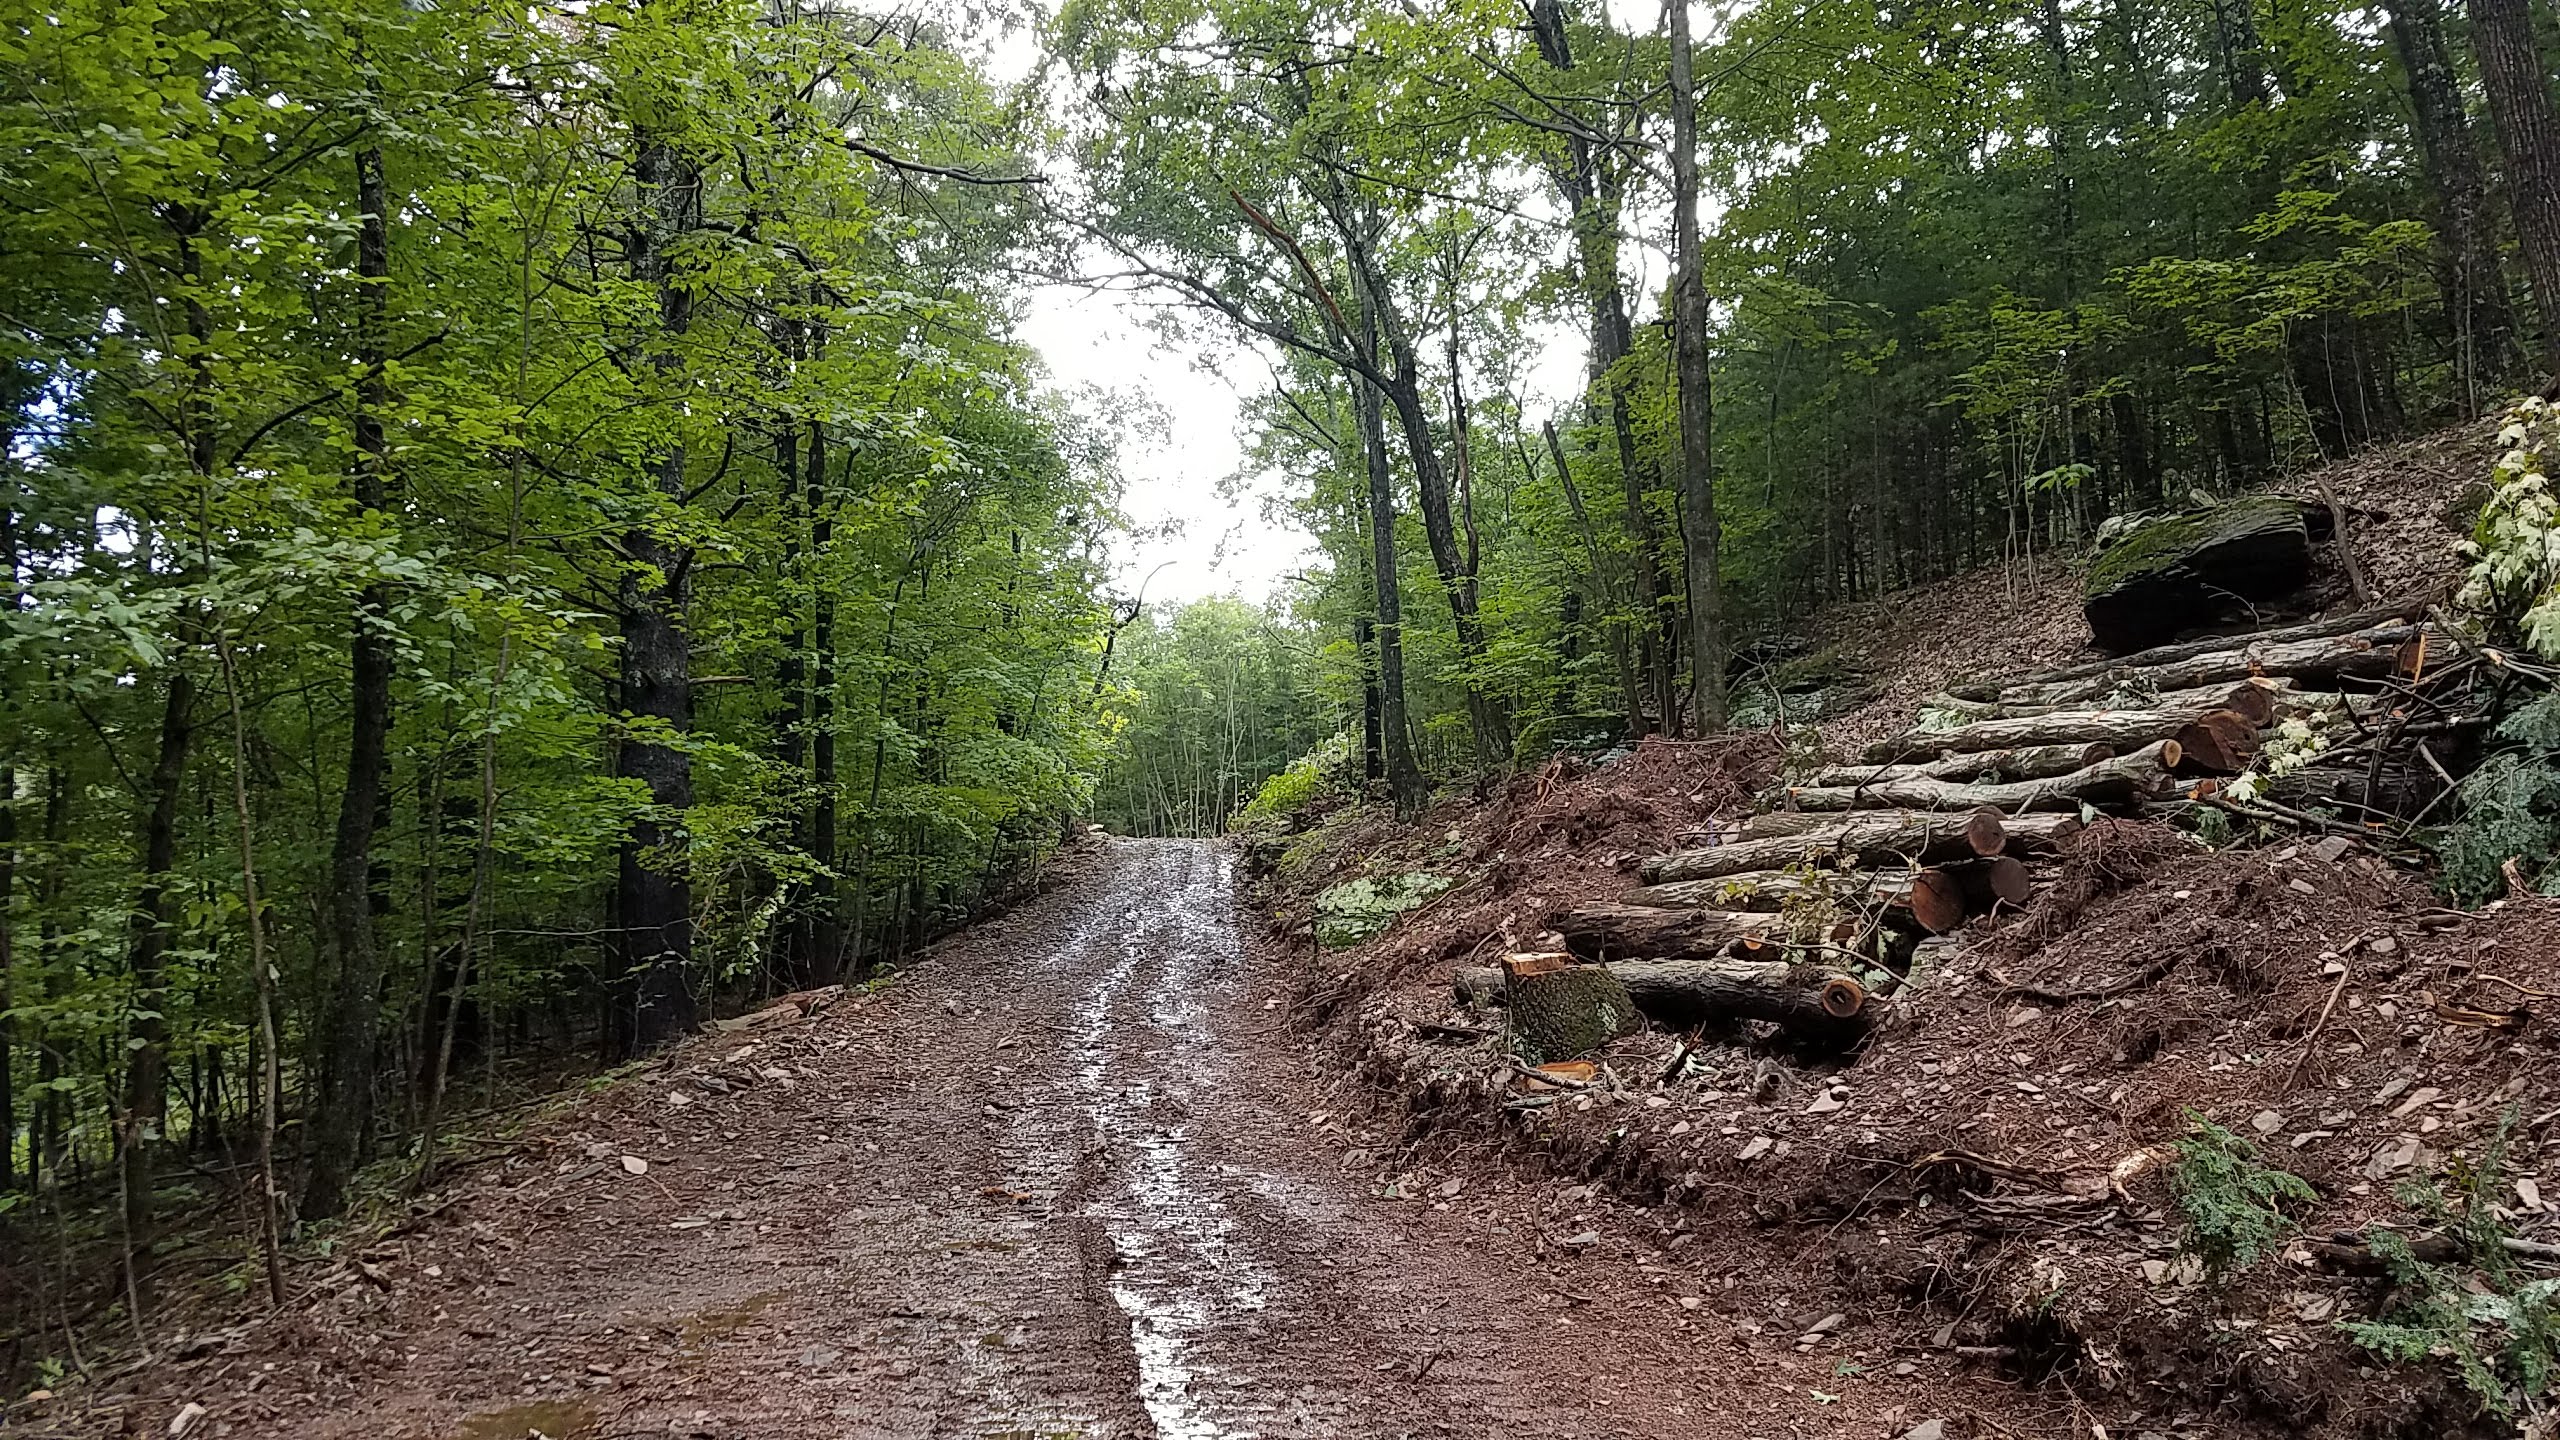 Construction Update: Infrastructure and Road Work at The Cliffs